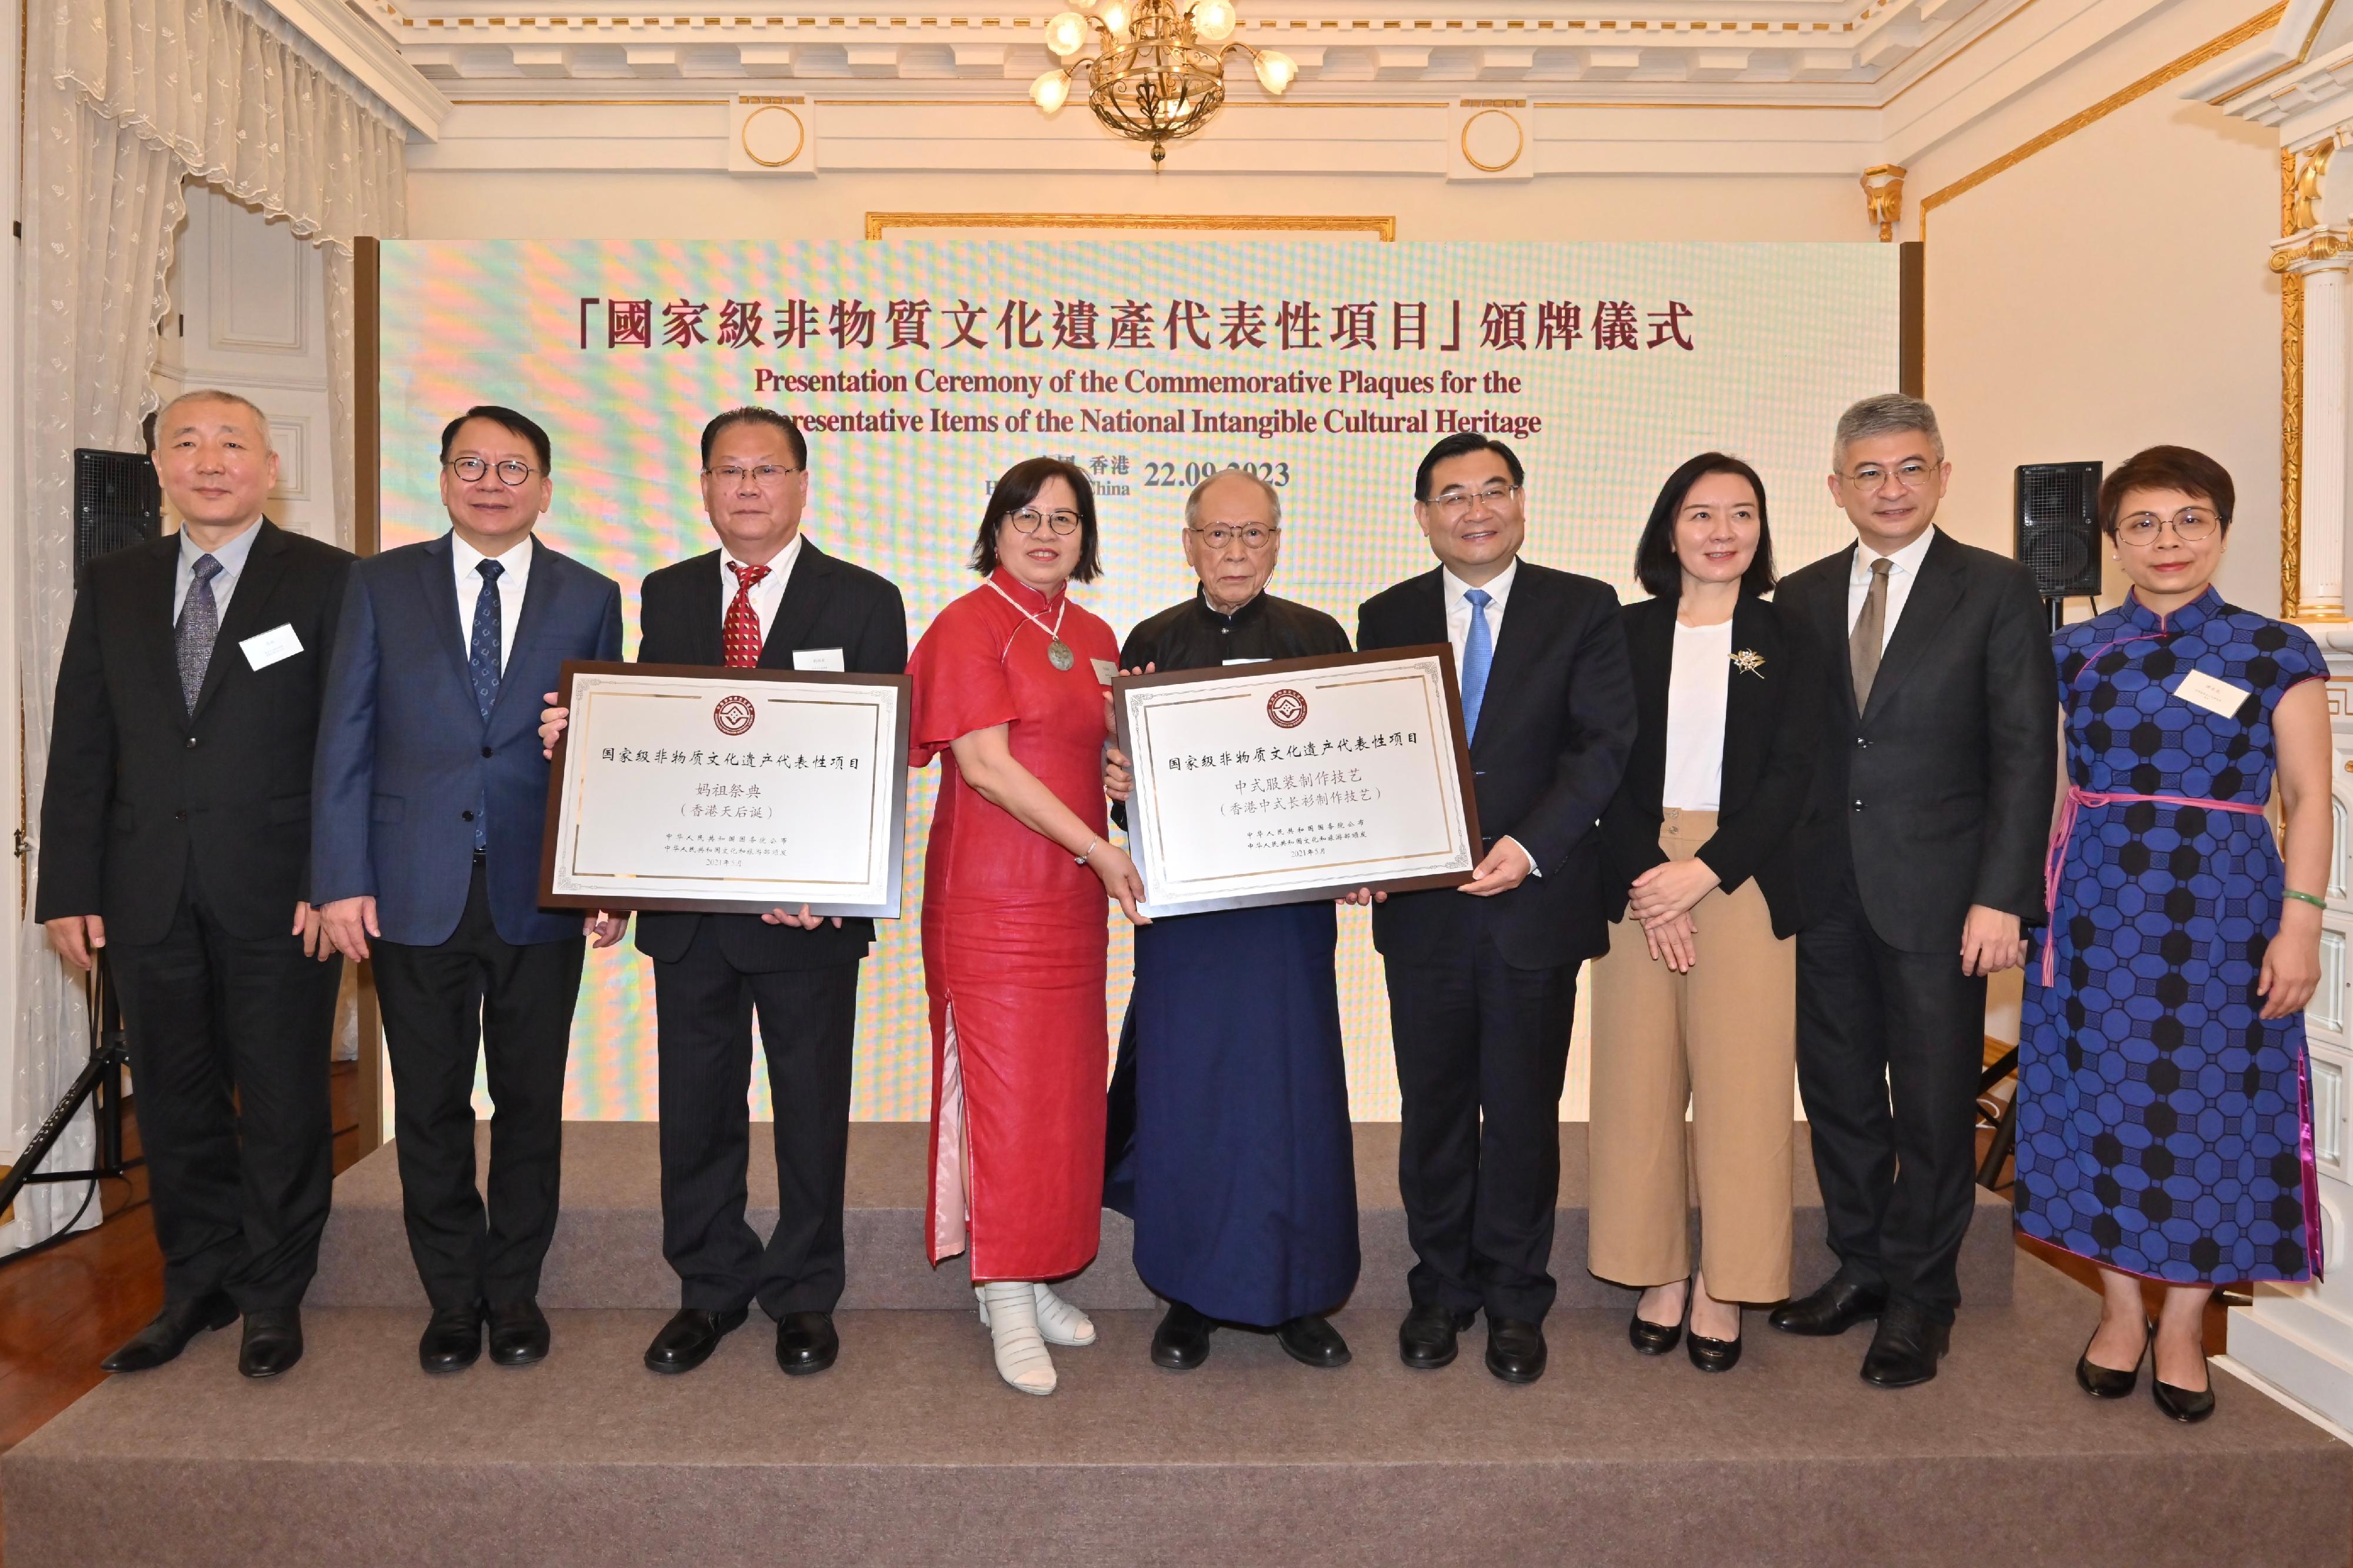 Two Hong Kong intangible cultural heritage (ICH) items, the Tin Hau Festival in Hong Kong and the Hong Kong cheongsam making technique, have been successfully inscribed onto the fifth batch of the list of the representative items of the national ICH announced by the State Council in 2021. The presentation ceremony of commemorative plaques was held today (September 22) at the Dr Sun Yat-sen Museum. Photo shows (from left) the Director of the Department of Hong Kong, Macao and Taiwan Affairs Office of the Ministry of Culture and Tourism of the People's Republic of China, Mr Gao Zheng; the Acting Chief Executive, Mr Chan Kwok-ki; the representative of the Hong Kong Tin Hau Festival Association, Mr Lau Kam-tong; the representatives of the Hong Kong Cheongsam Association, Ms Ellen Fu and Mr Yau Fook-hing; the Minister of Culture and Tourism, Mr Hu Heping; the Deputy Director of the Liaison Office of the Central People's Government in the Hong Kong Special Administrative Region, Ms Lu Xinning; the Acting Secretary for Culture, Sports and Tourism, Mr Raistlin Lau; and the Acting Director of Leisure and Cultural Services, Miss Eve Tam, at the ceremony.